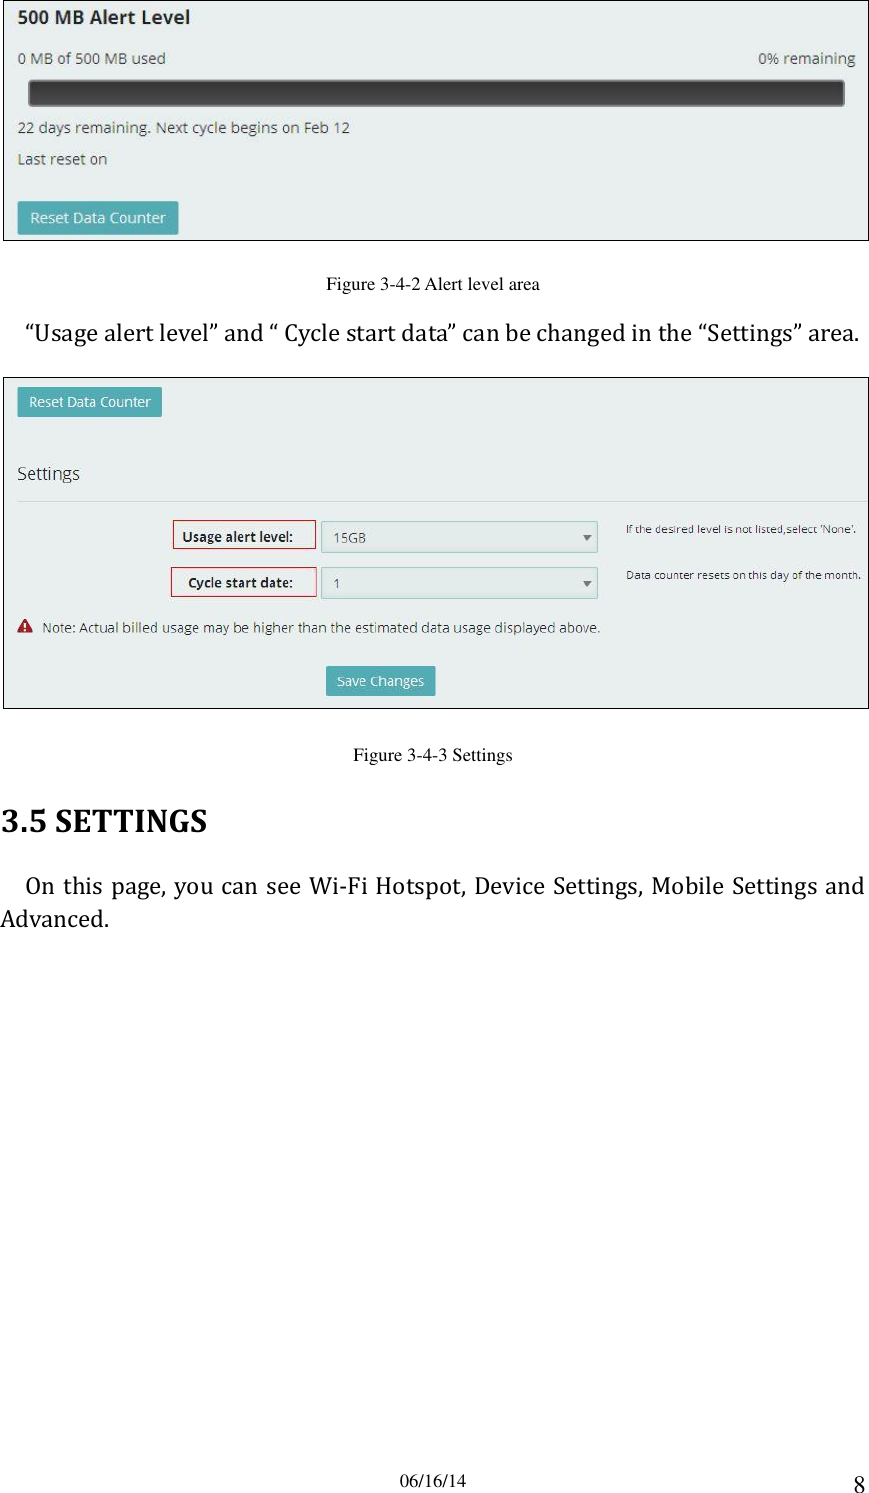 06/16/14 8  Figure 3-4-2 Alert level area   “Usage alert level” and “ Cycle start data” can be changed in the “Settings” area.  Figure 3-4-3 Settings 3.5 SETTINGS On this page, you can see Wi-Fi Hotspot, Device Settings, Mobile Settings and Advanced. 